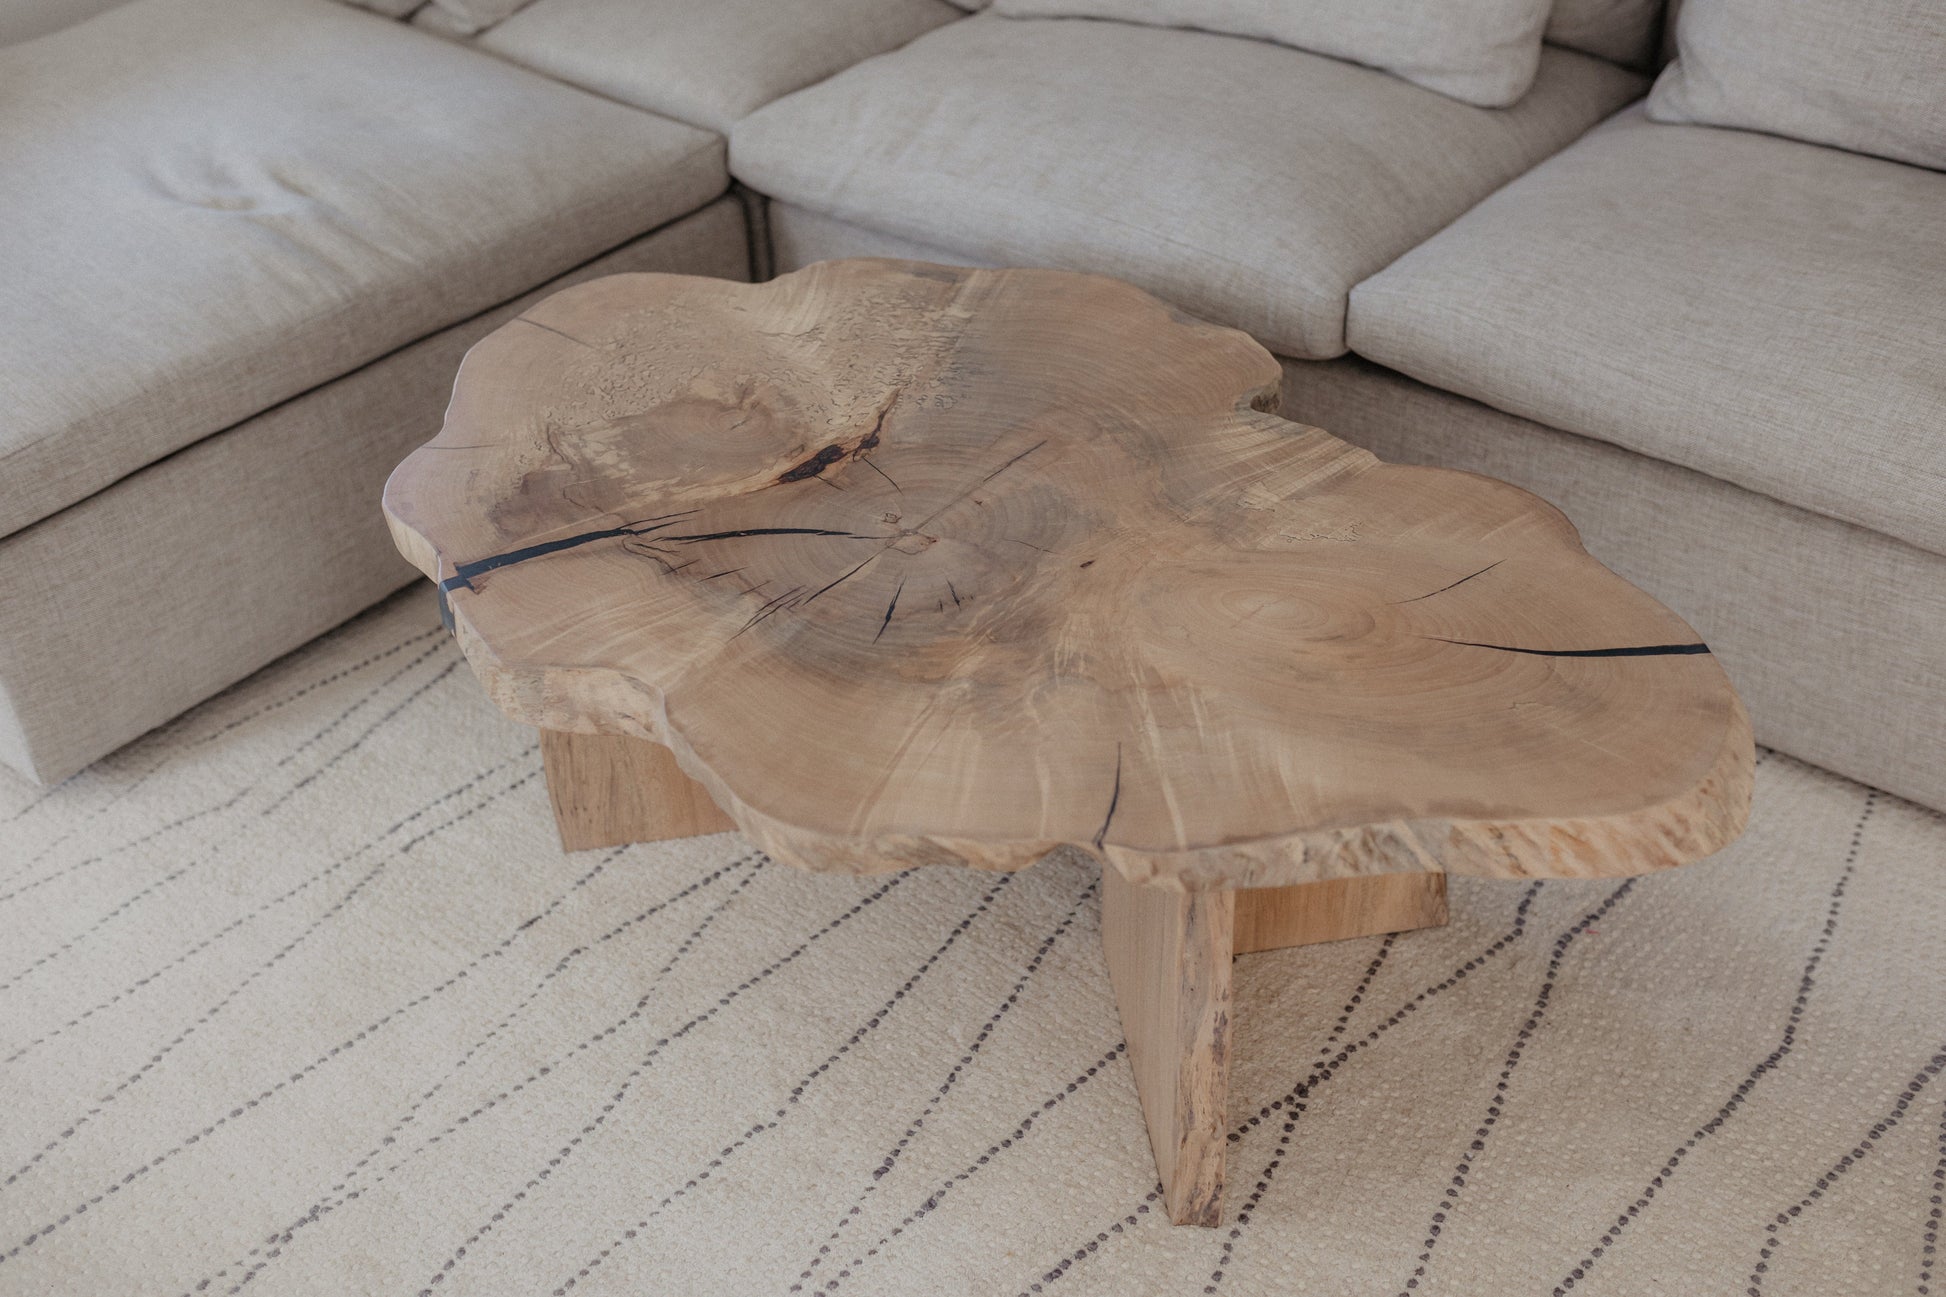 The Carpentry Shop Co. Custom Wood Coffee Table Customizable Slab Style Coffee Table | The Carpentry Shop Co.